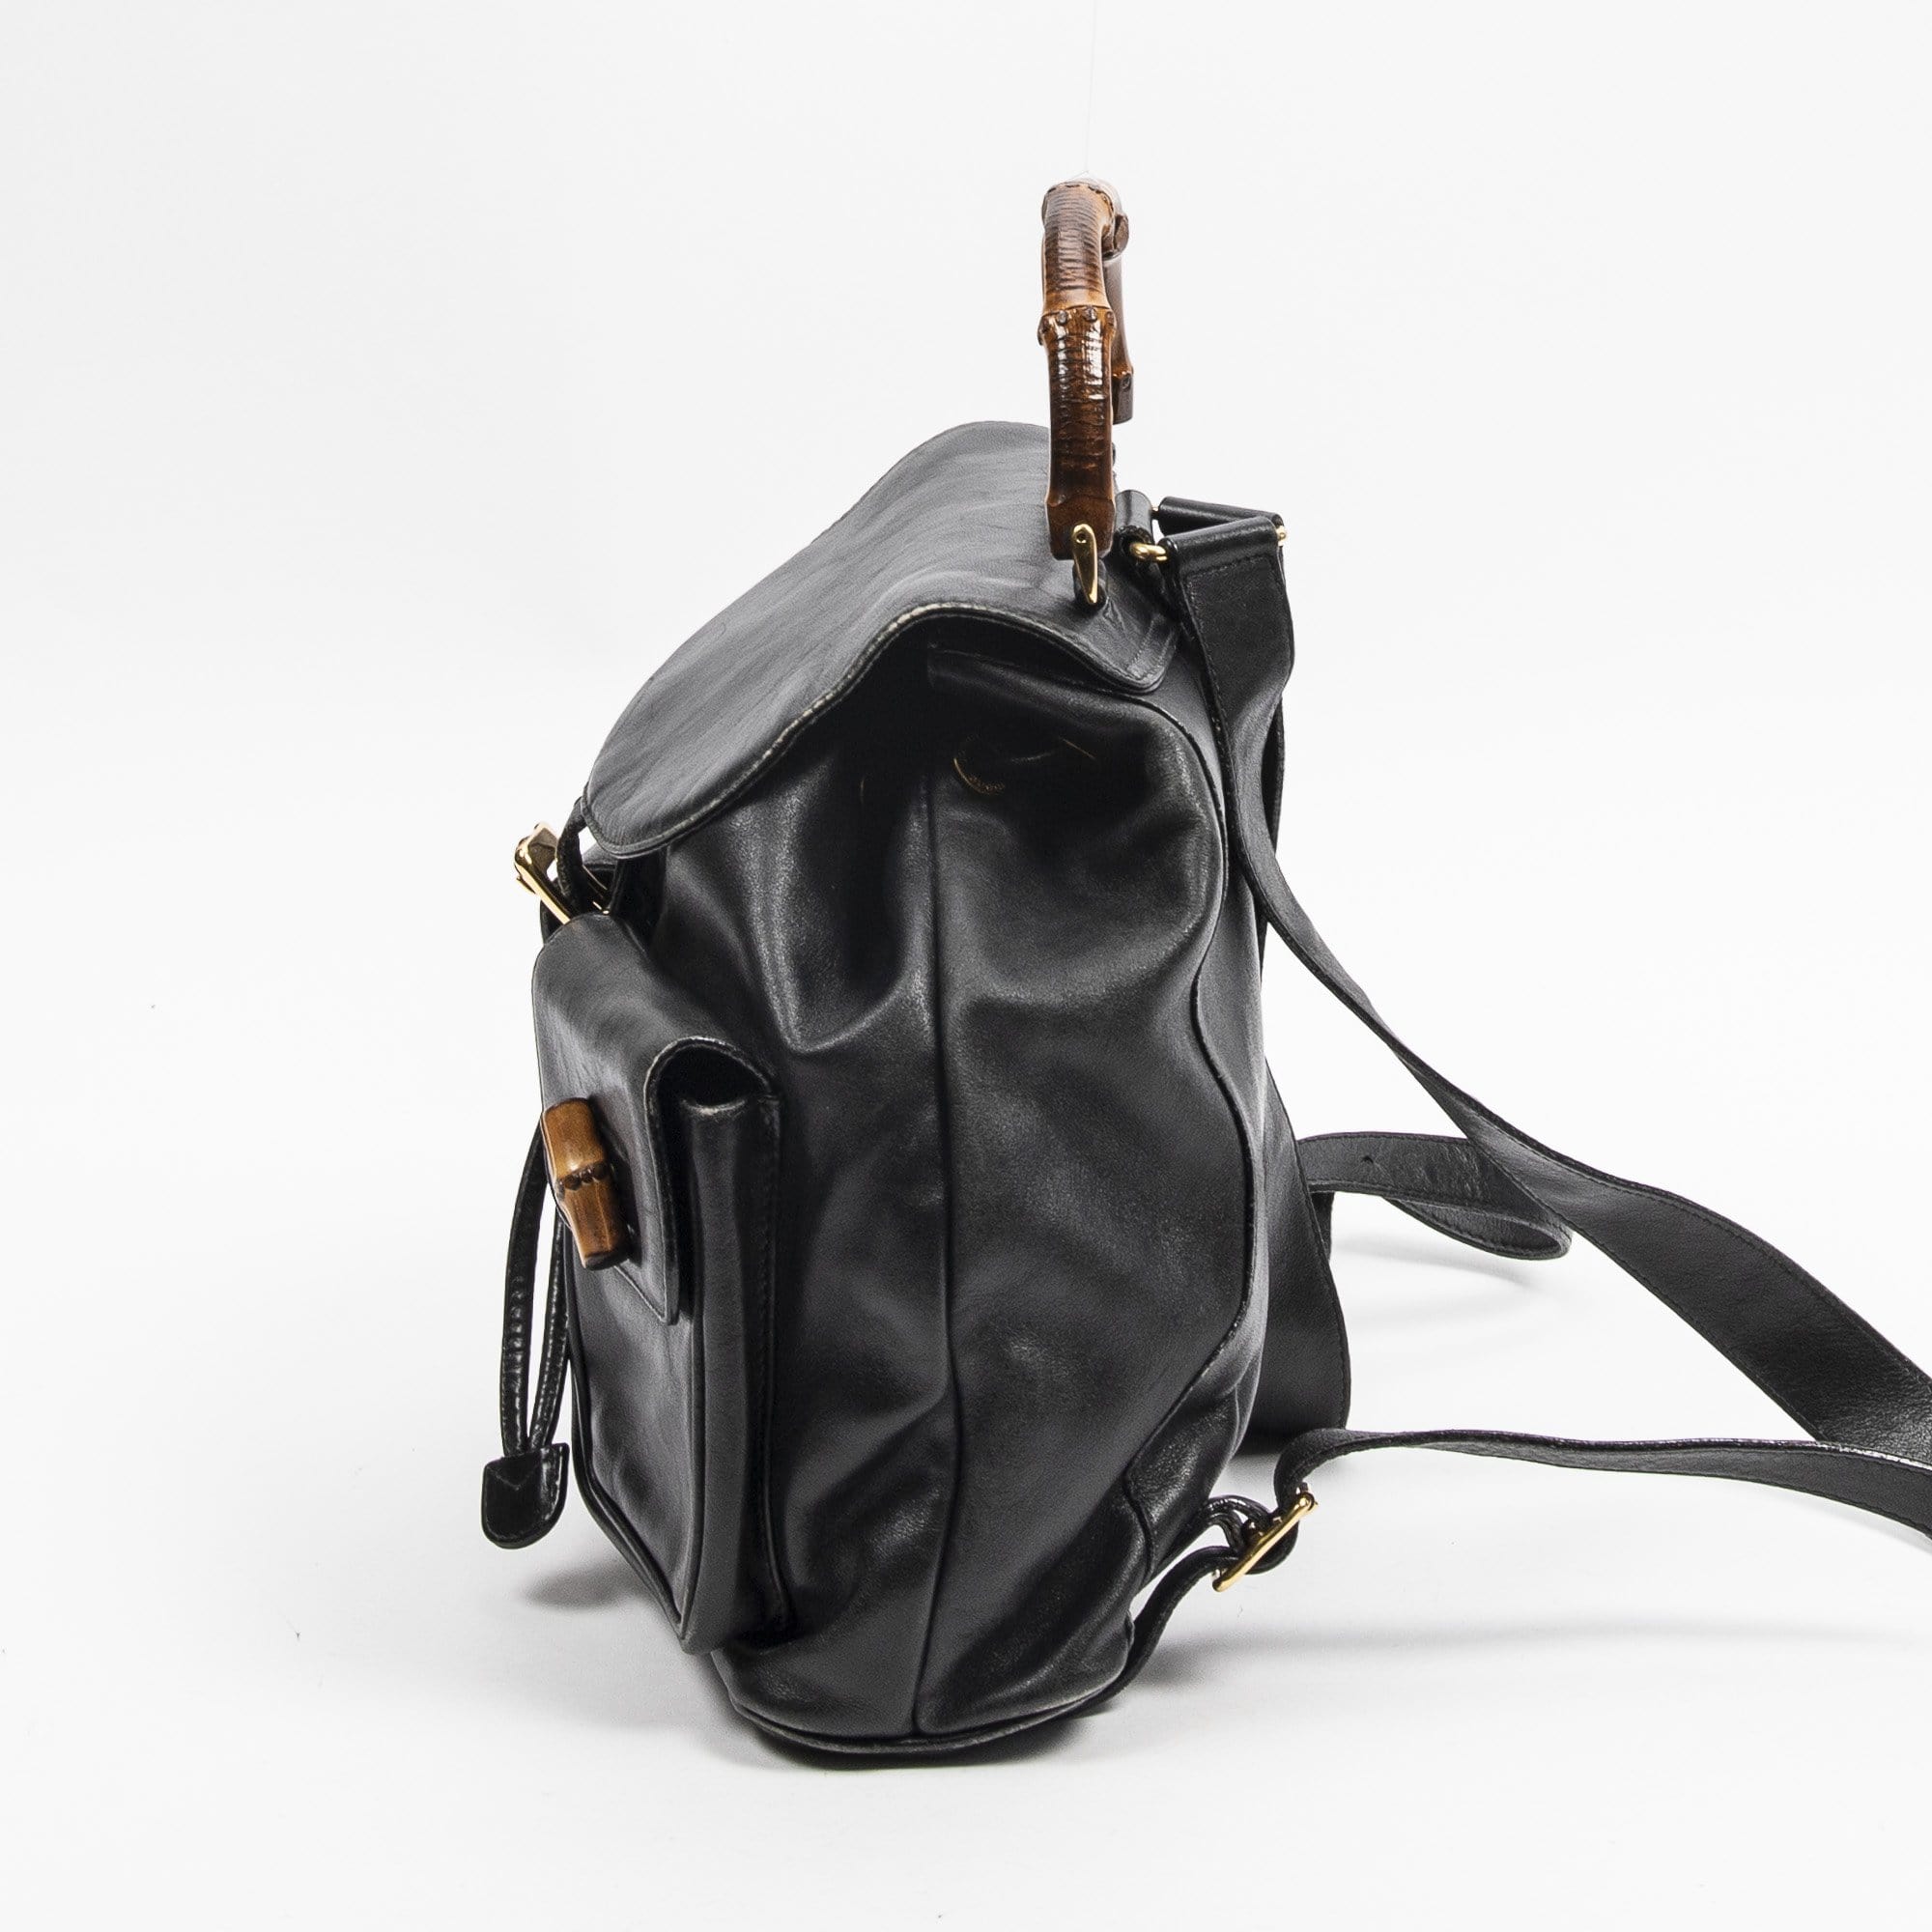 Gucci Gucci Large Bamboo Black Leather Backpack  - AWL1939